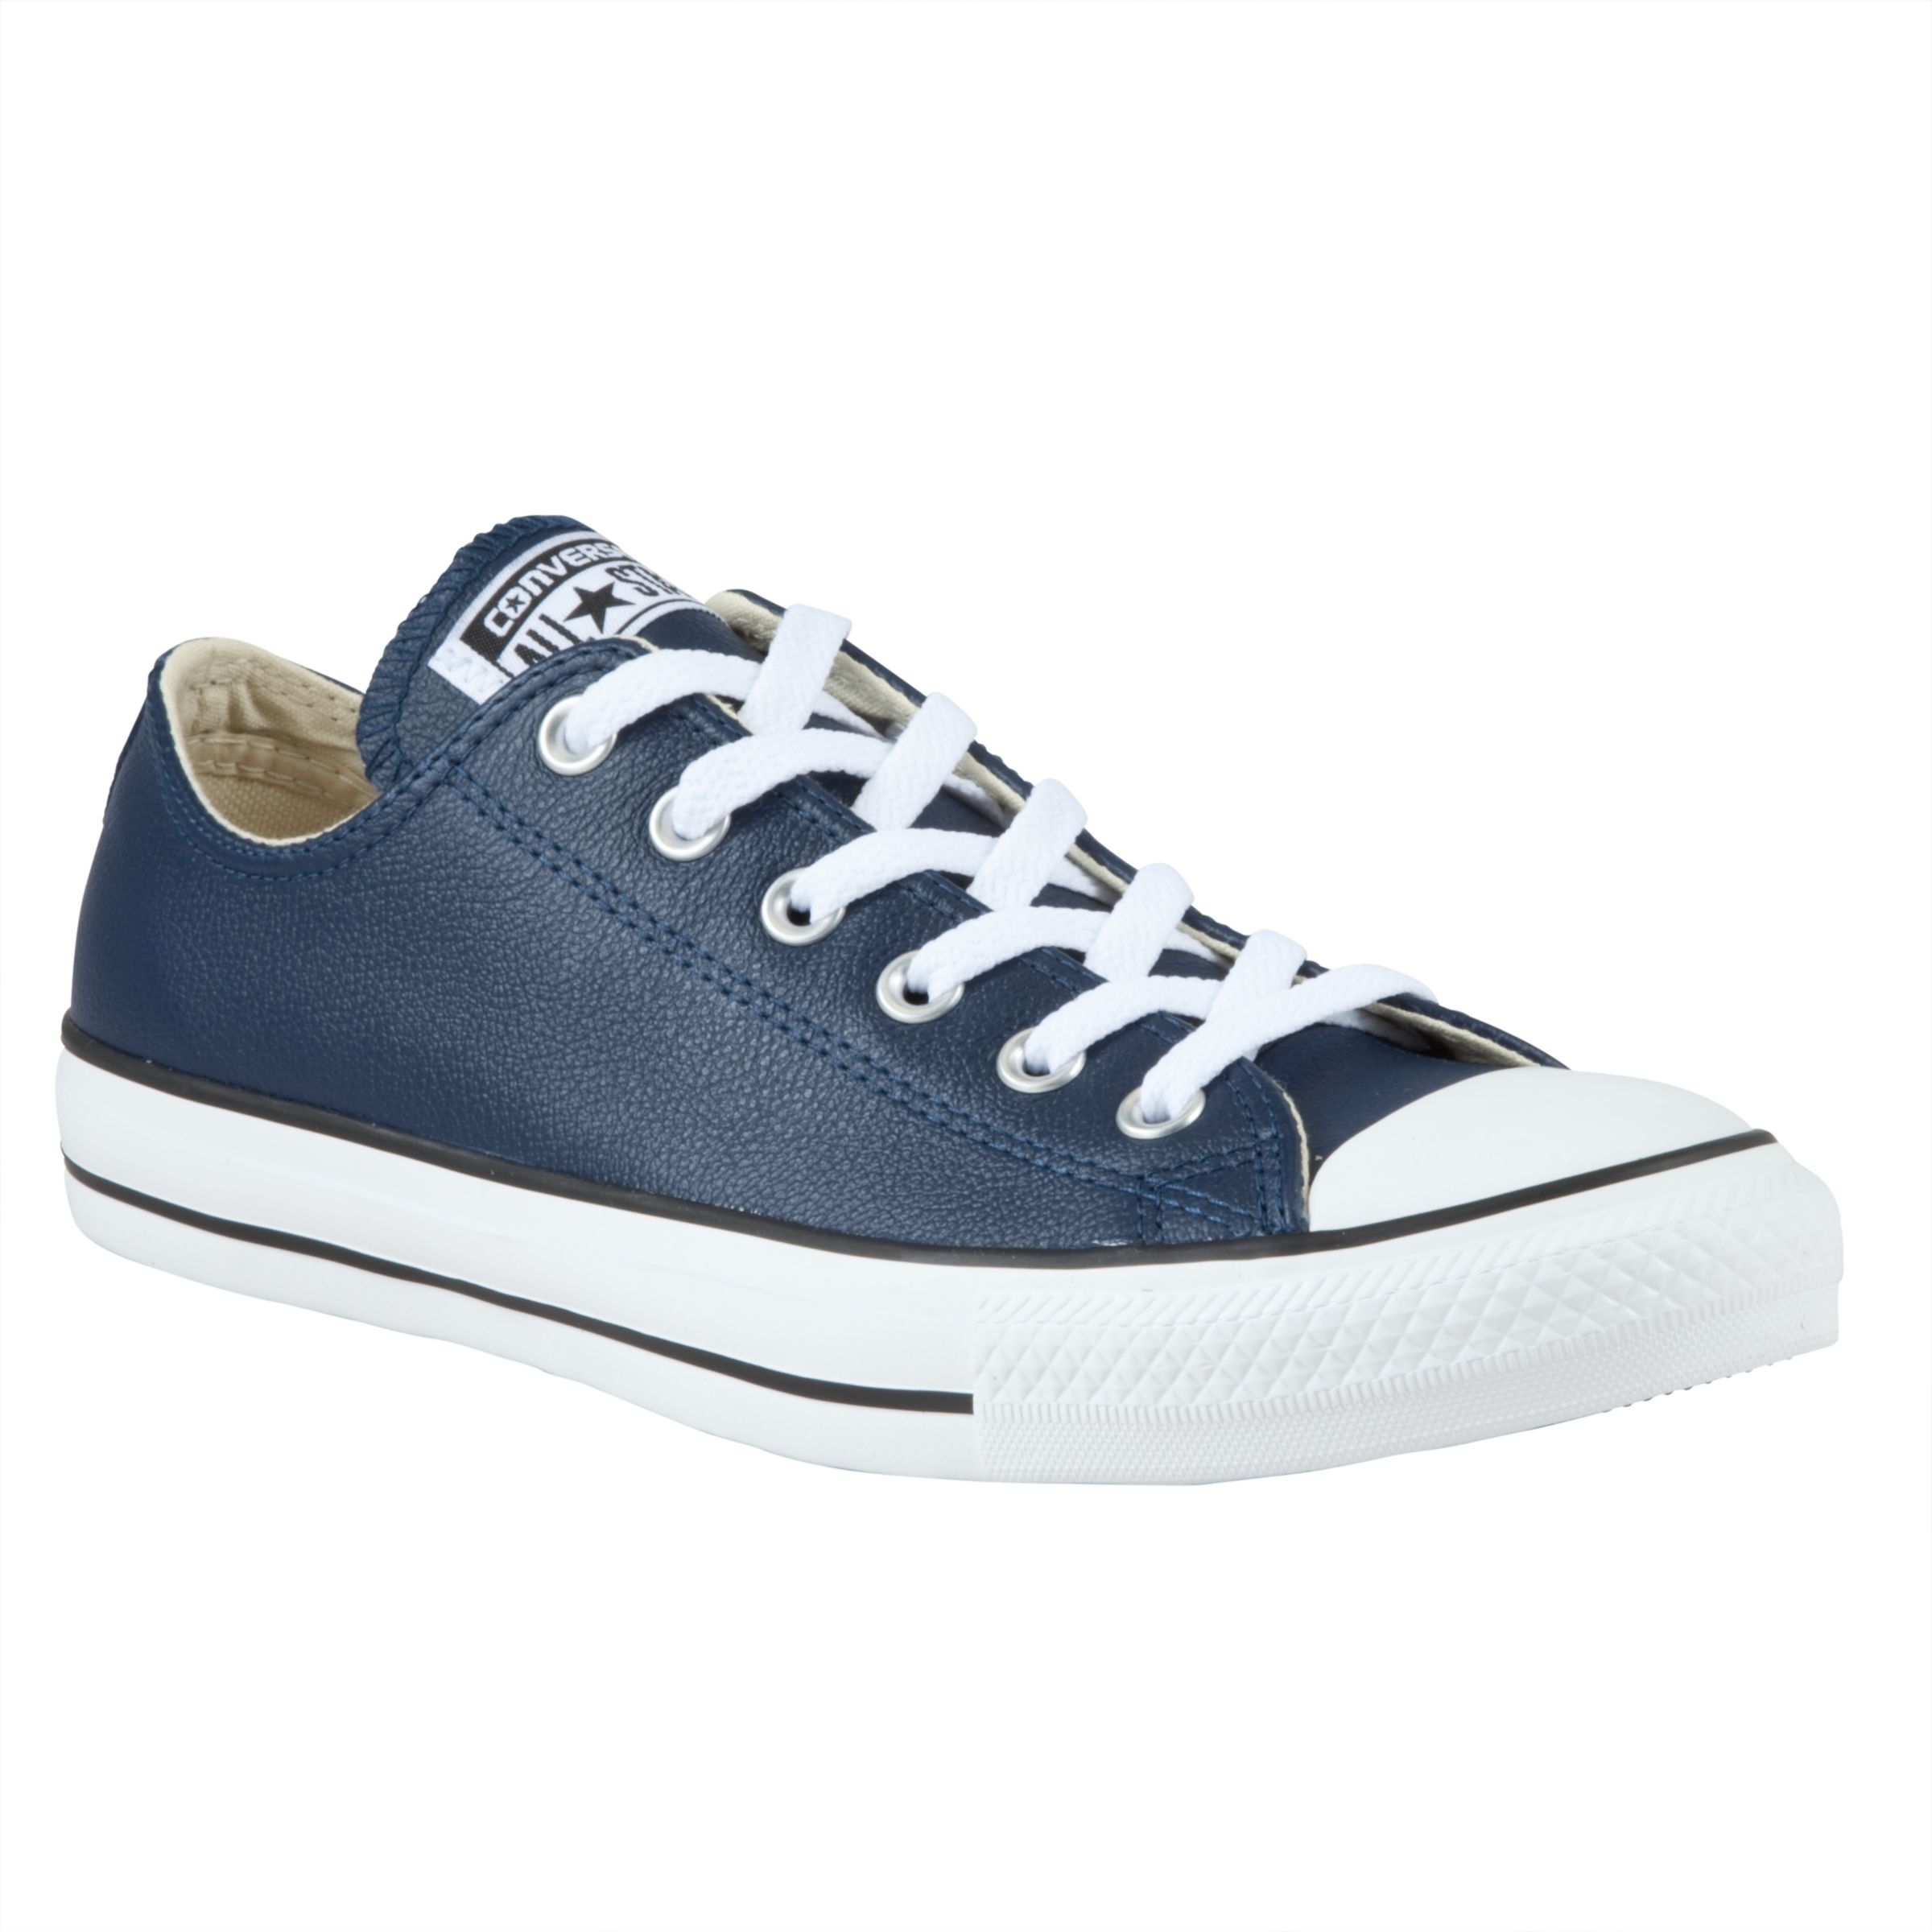 Converse Chuck Taylor All Star Hi Leather Navy